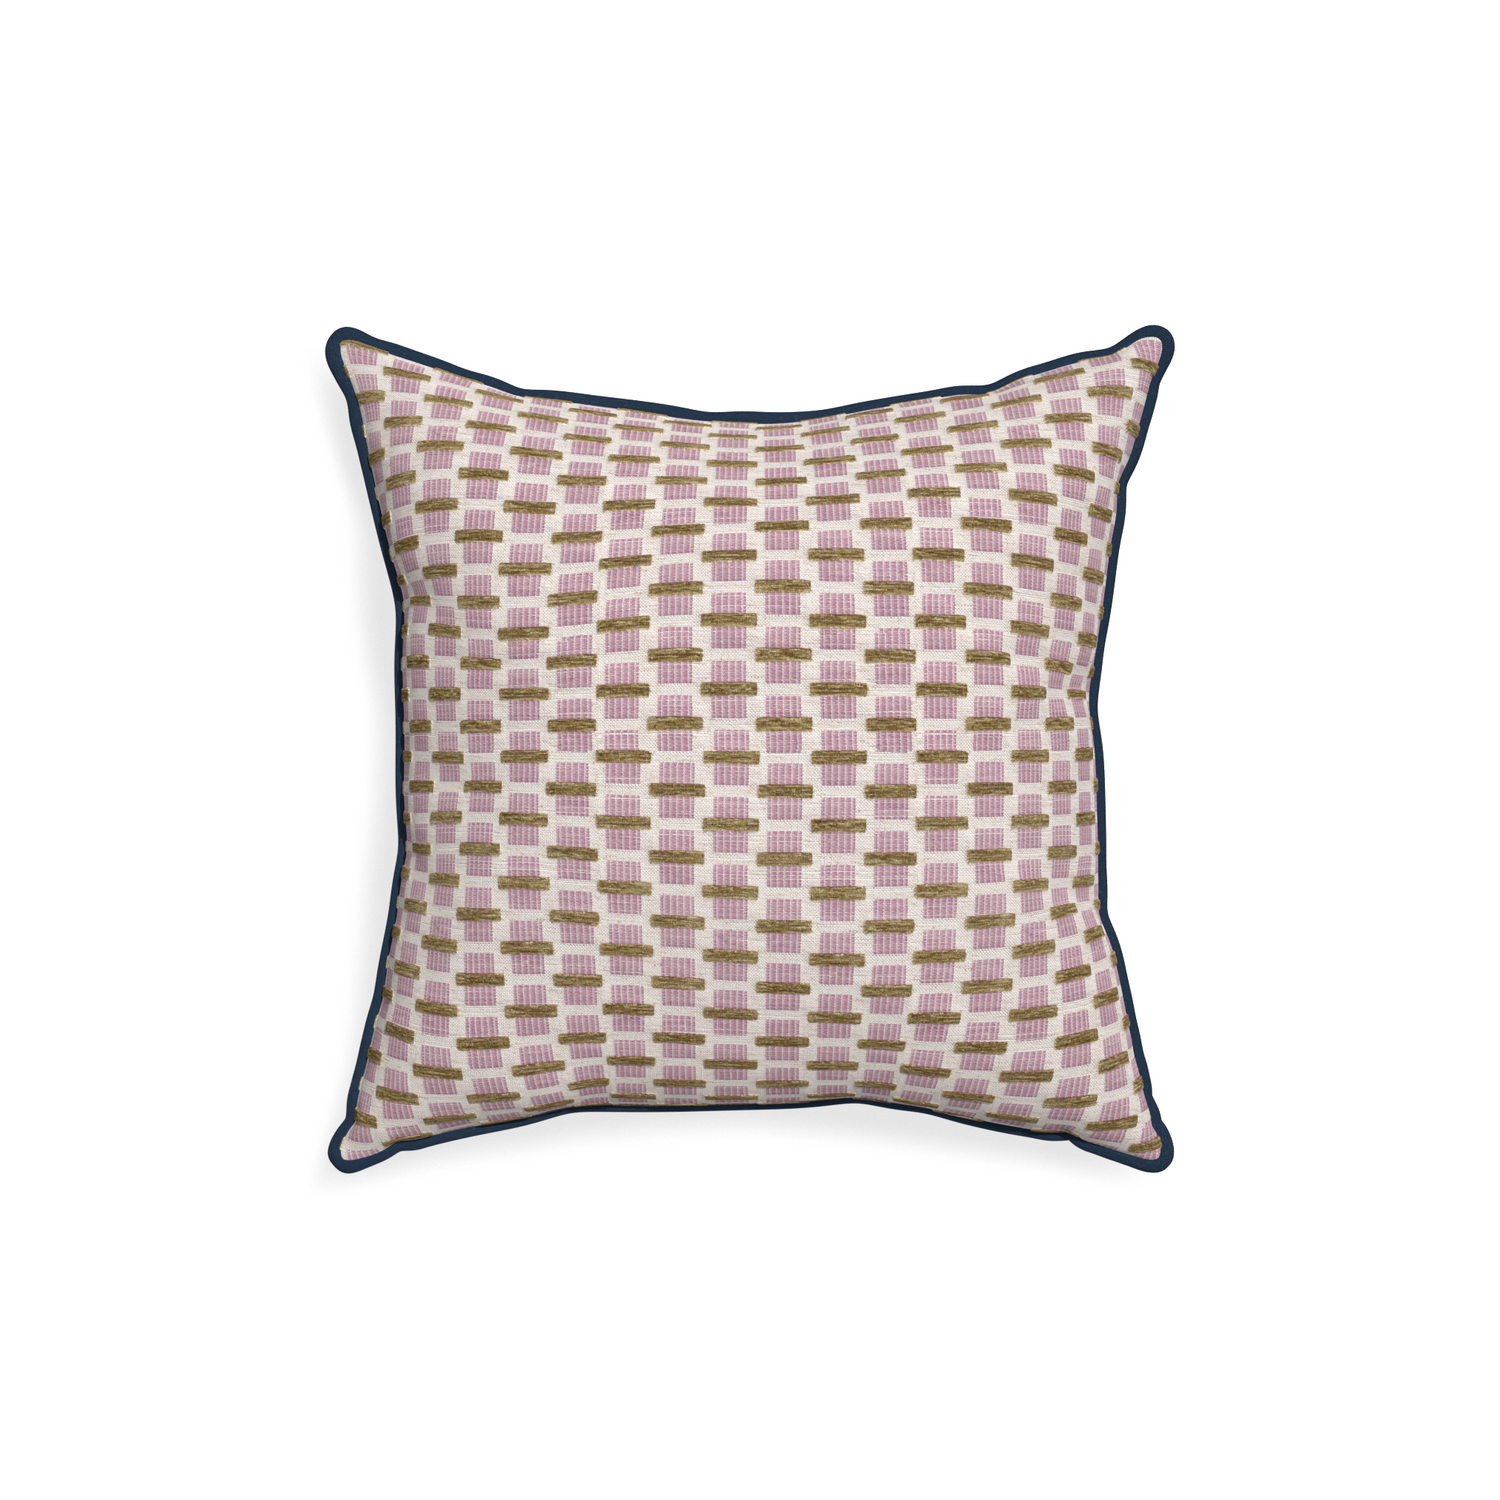 18-square willow orchid custom pink geometric chenillepillow with c piping on white background